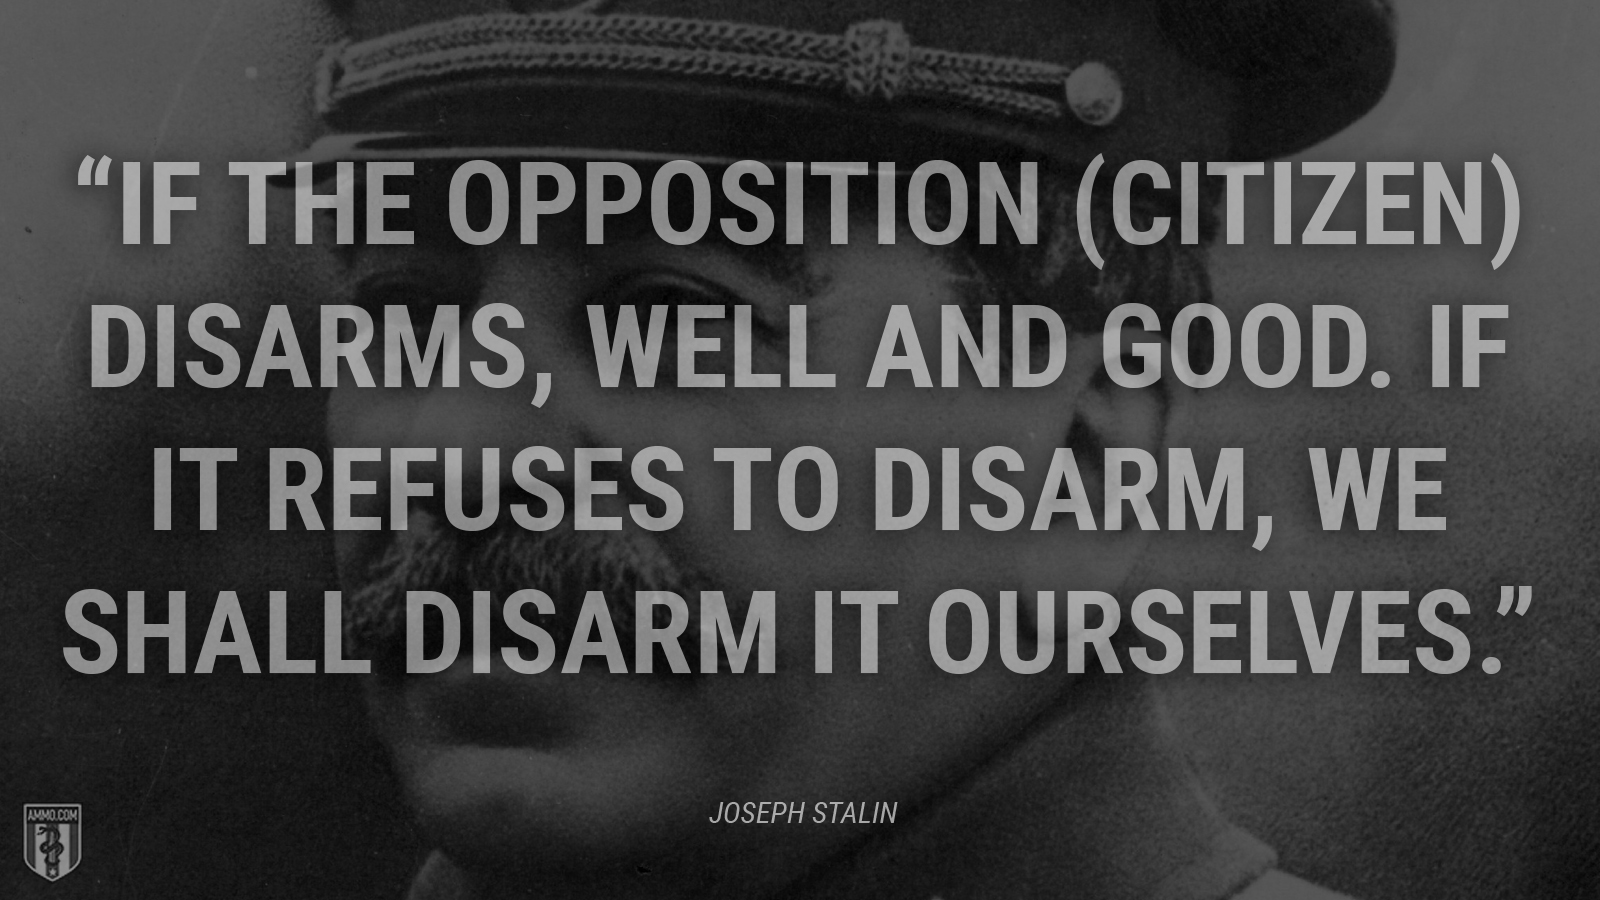 “If the opposition (citizen) disarms, well and good. If it refuses to disarm, we shall disarm it ourselves.” - Joseph Stalin